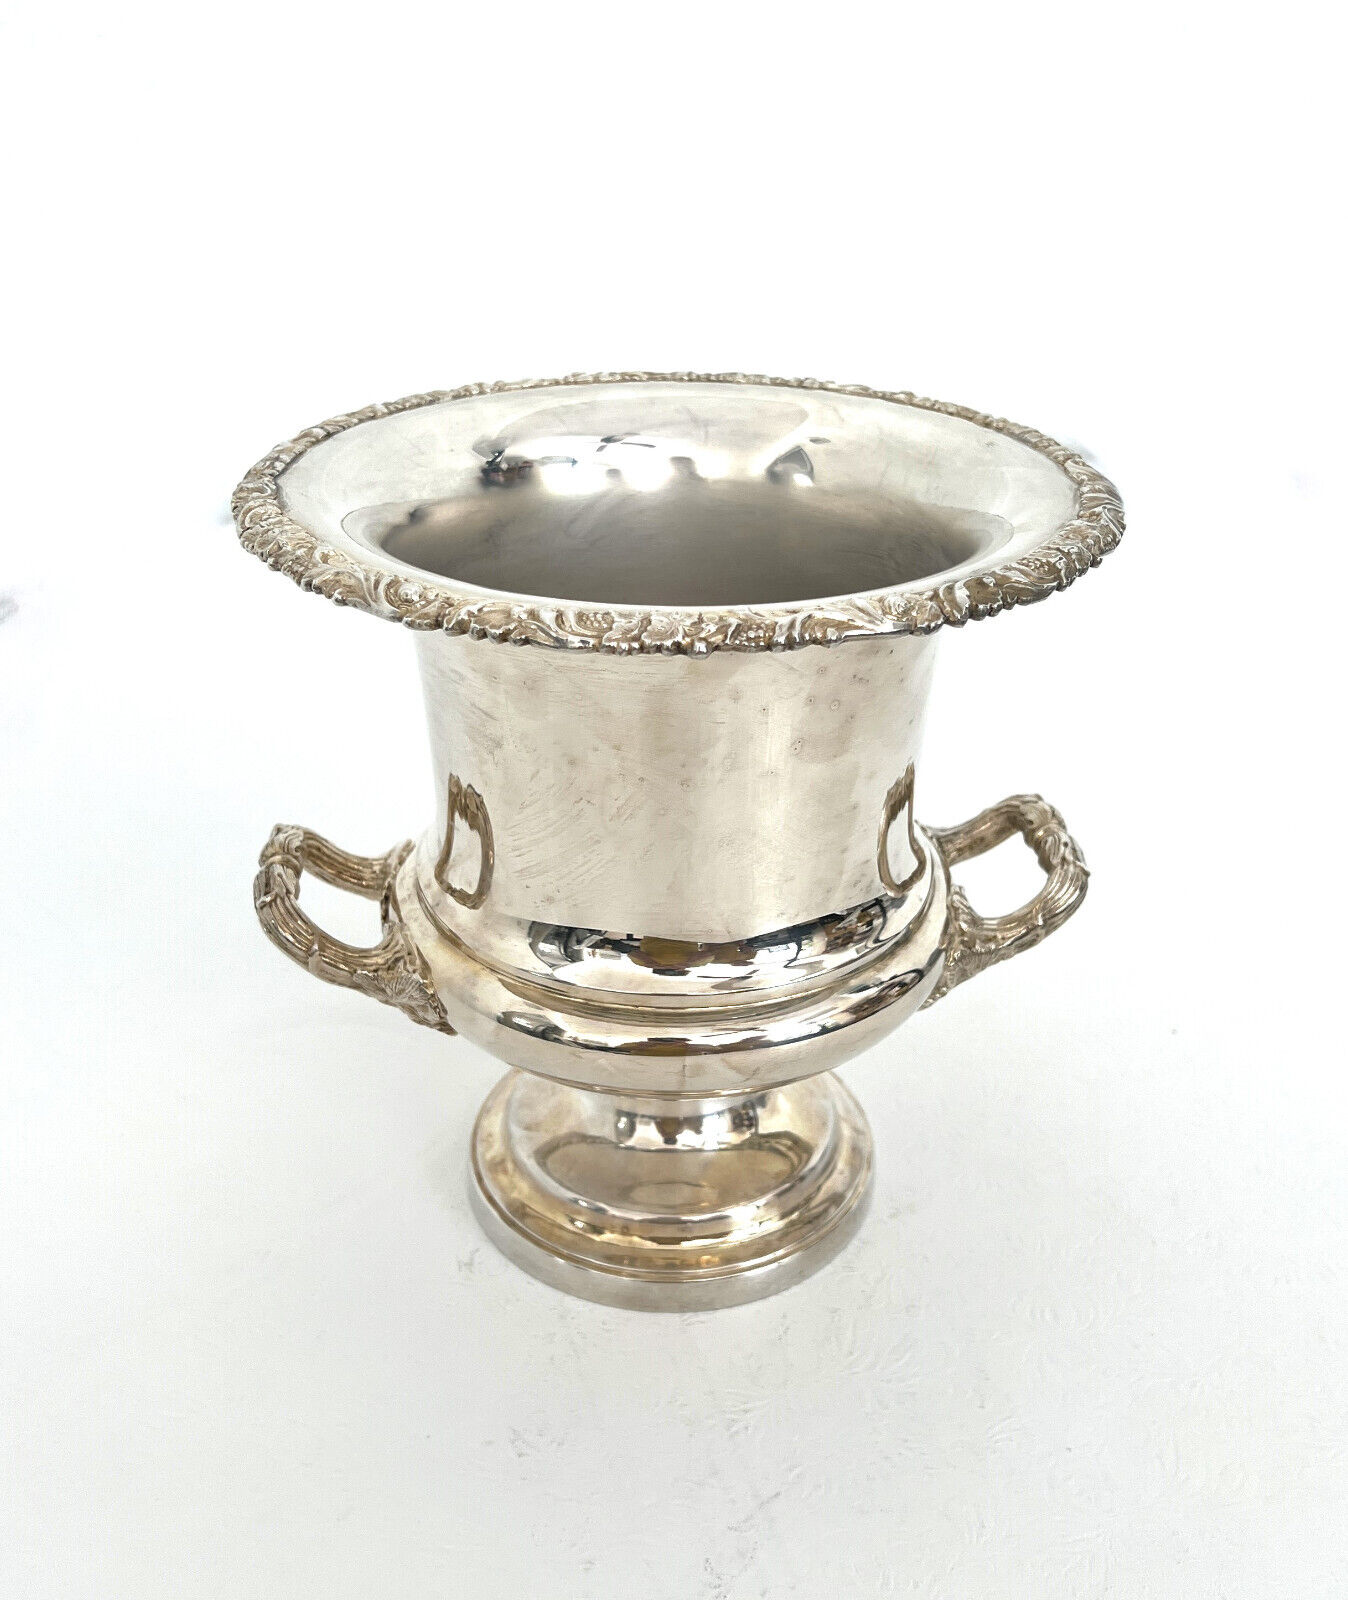 SIL002 Silver Plated Wine/Champagne Cooler Ice Bucket by Barker Ellis, England